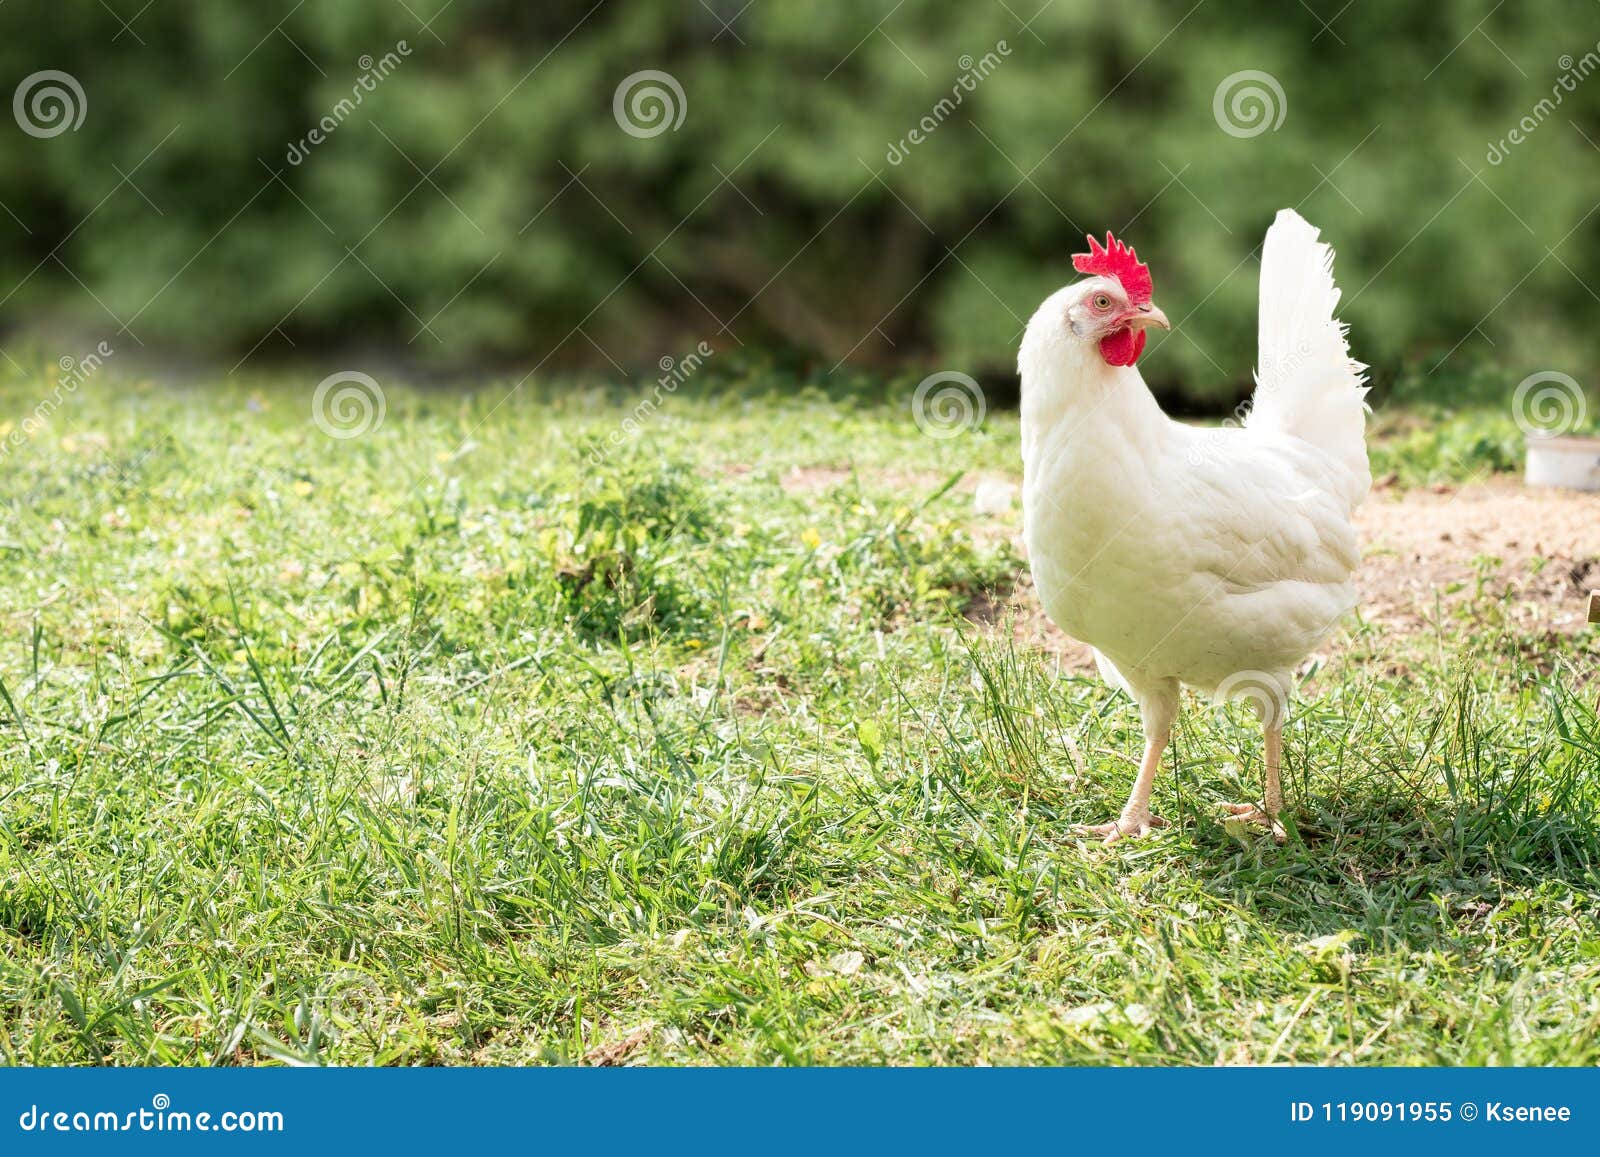 High-sex White Chicken Walking in a Yard Stock Image photo